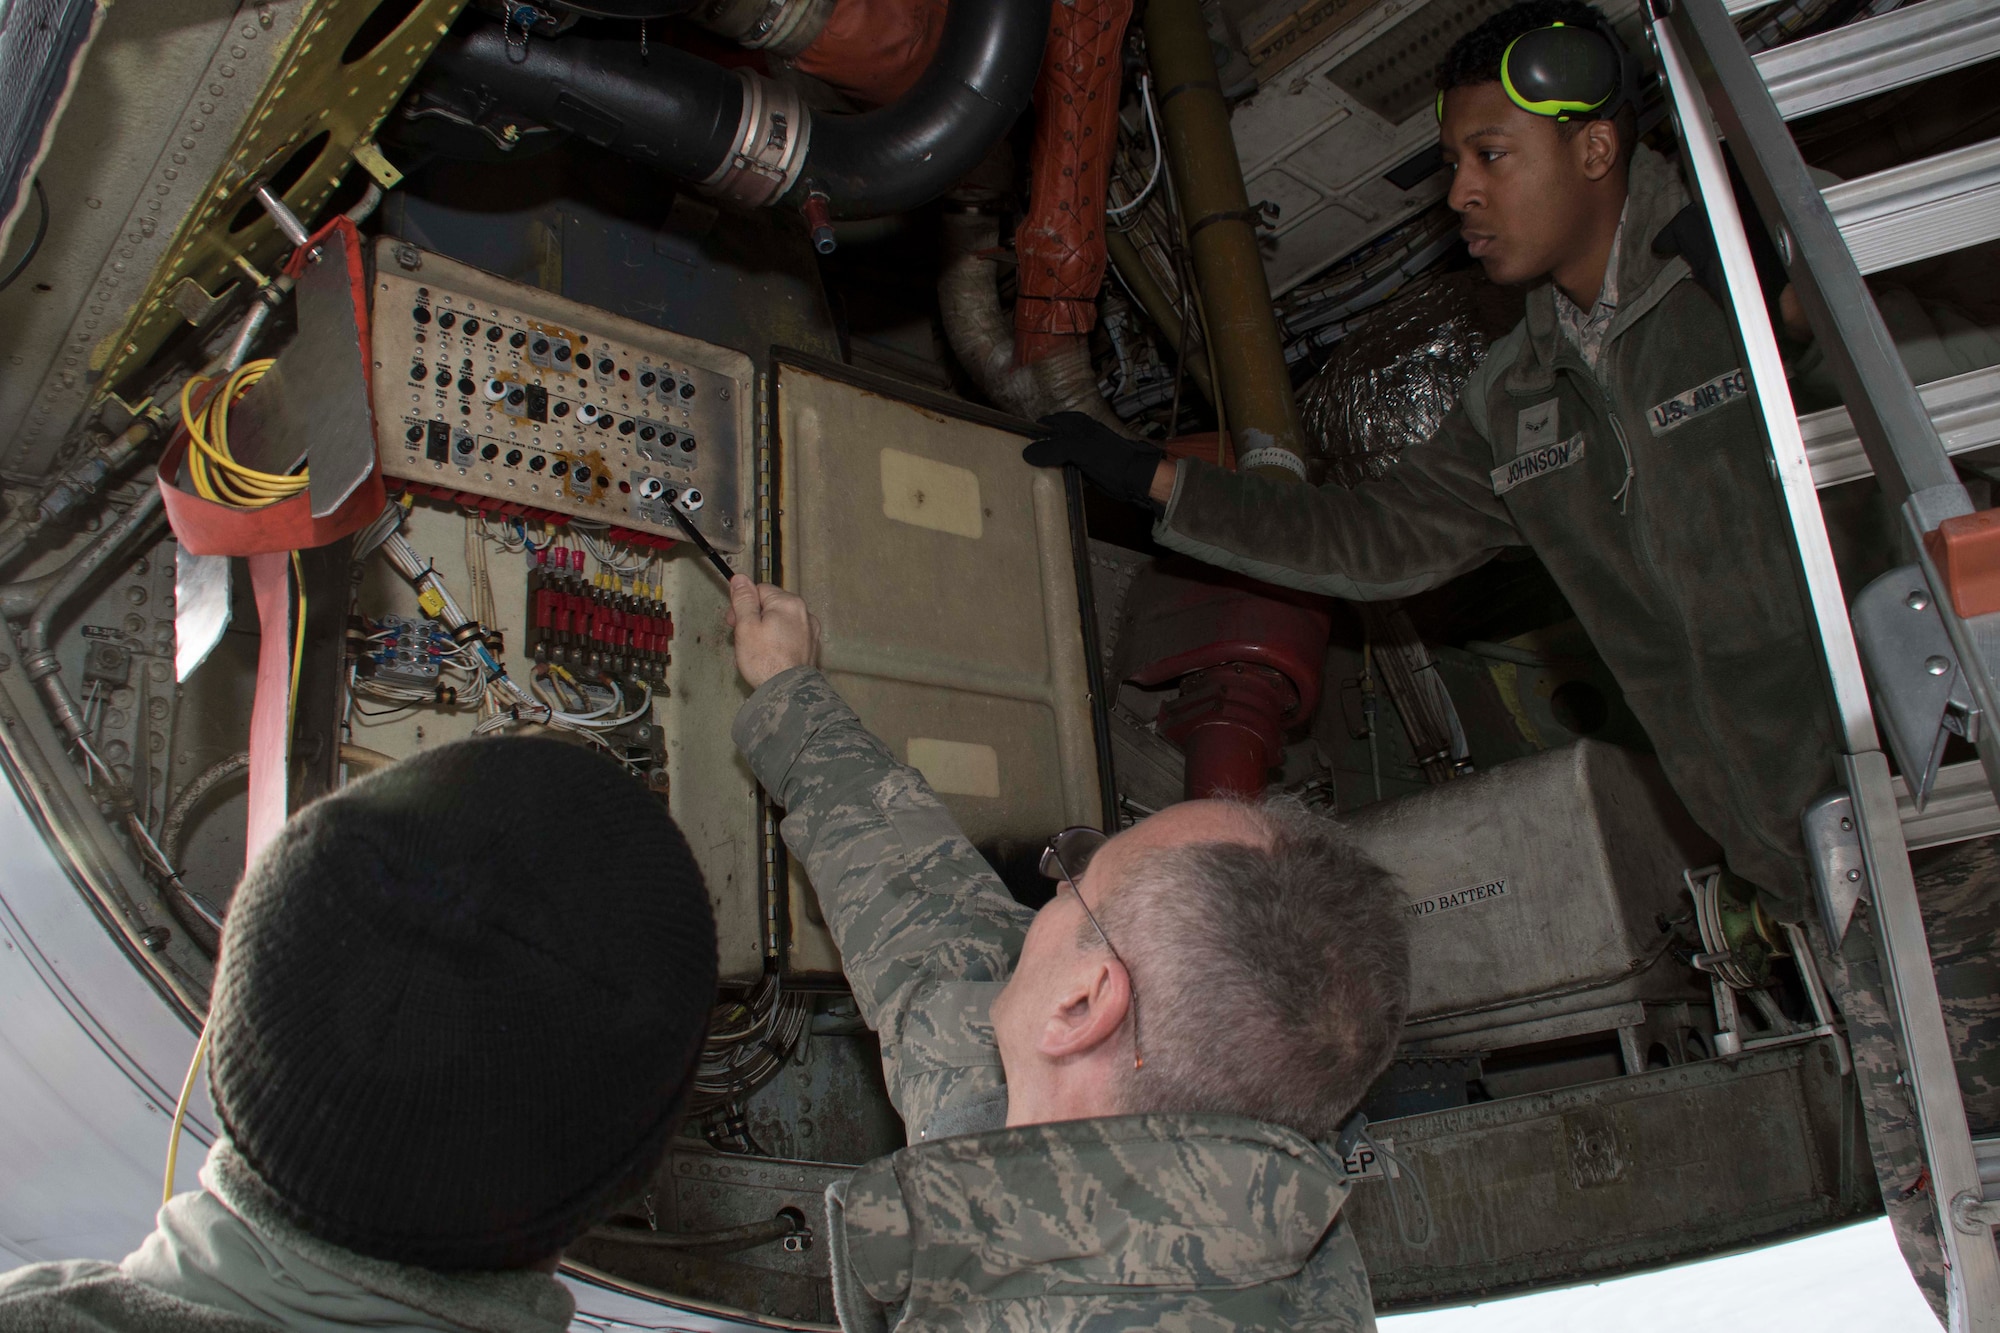 U.S. Air Force Master Sgt. Tim Pastore, 307th Aircraft Maintenance Squadron avionics specialist, reviews work done on a B-52 Stratofortress breaker box done by Senior Airman Deonitis Gardiner and Airman First Class James Johnson, 11th Aircraft Maintenance Unit journeymen, at Nellis Air Force Base, Nevada, Dec. 11, 2018.   Pastore is a Reserve Citizen Airman.  He regularly mentors active-duty Airmen like Gardiner and Johnson in keeping with the total force integration model. (U.S. Air Force photo by Master Sgt. Ted Daigle)